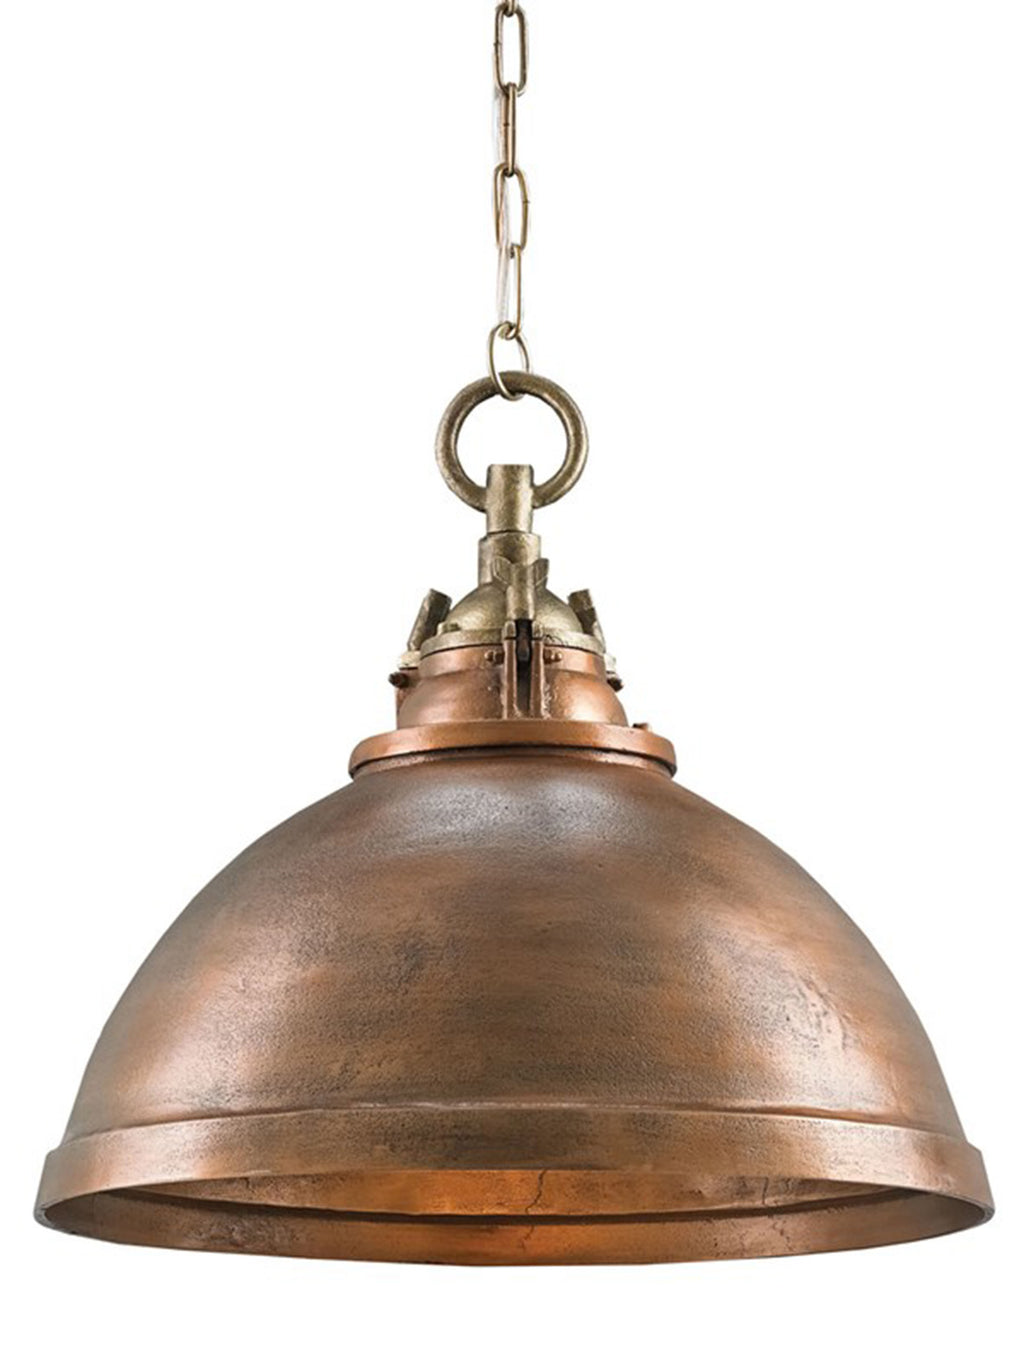 Aileen Pendant: Hand-finished copper aluminum body with antique brass hardware. Versatile dome-shaped pendant with a warm and rich finish. Rough luxe offering with one light.  Finish: Copper/Antique Brass Materials: Cast Aluminum Overall: 18"h x 20"dia. Weight: 14 lb Lights: 1 Watts per Socket/Item: 60/60 Socket: E26 Suggested Bulb Type: A Standard Light Direction: Downward Chain Included: 6' Brass Cord: 13' Gold